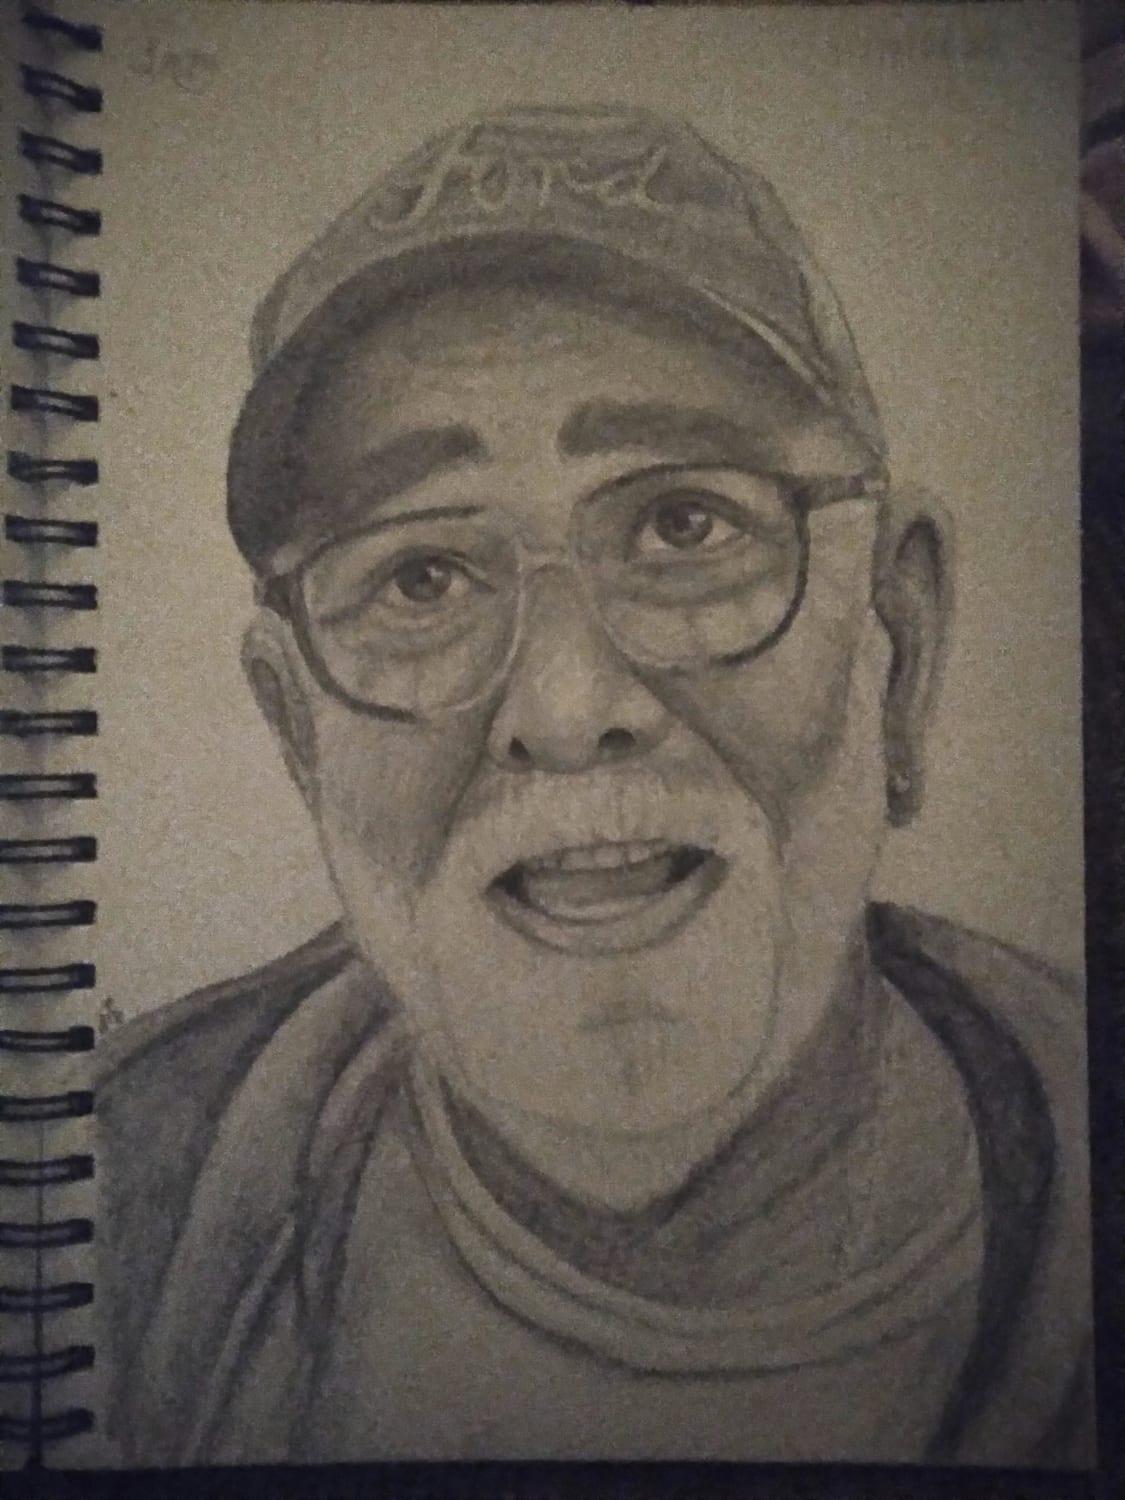 I drew my dad's friend. I'm 15 be nice. Critique is welcome